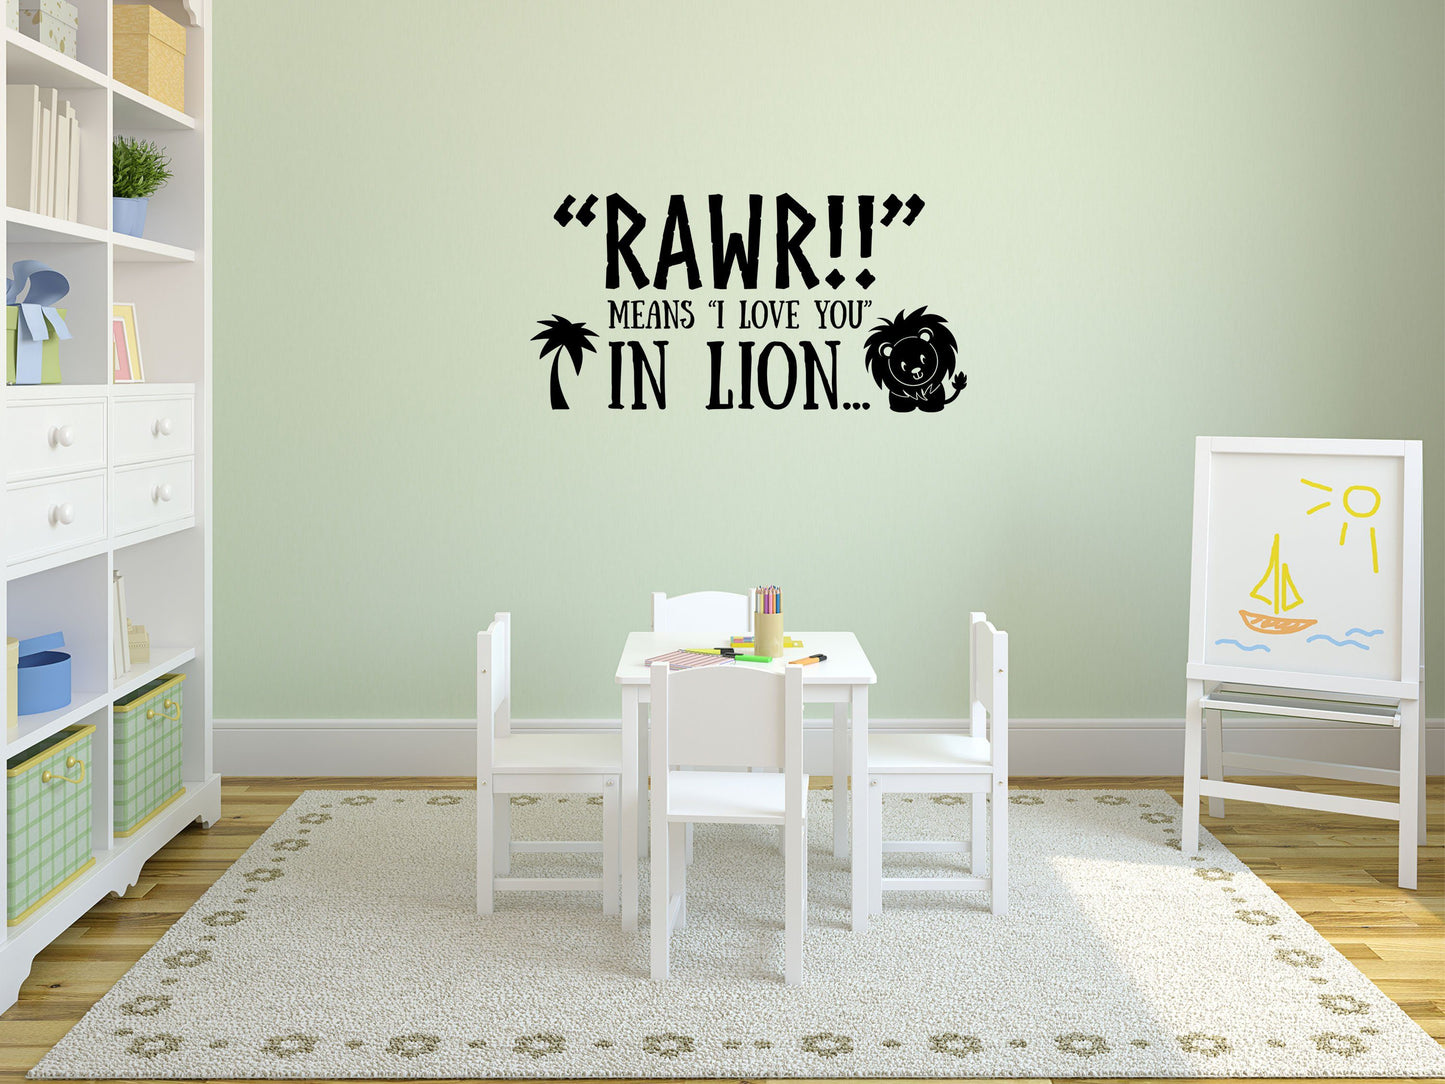 Lion Decal - Cute Lion Vinyl Decal - Kids Room Wall Decals - Cute Wall Decor - Rawr Means I Love You Vinyl Wall Decal Done 